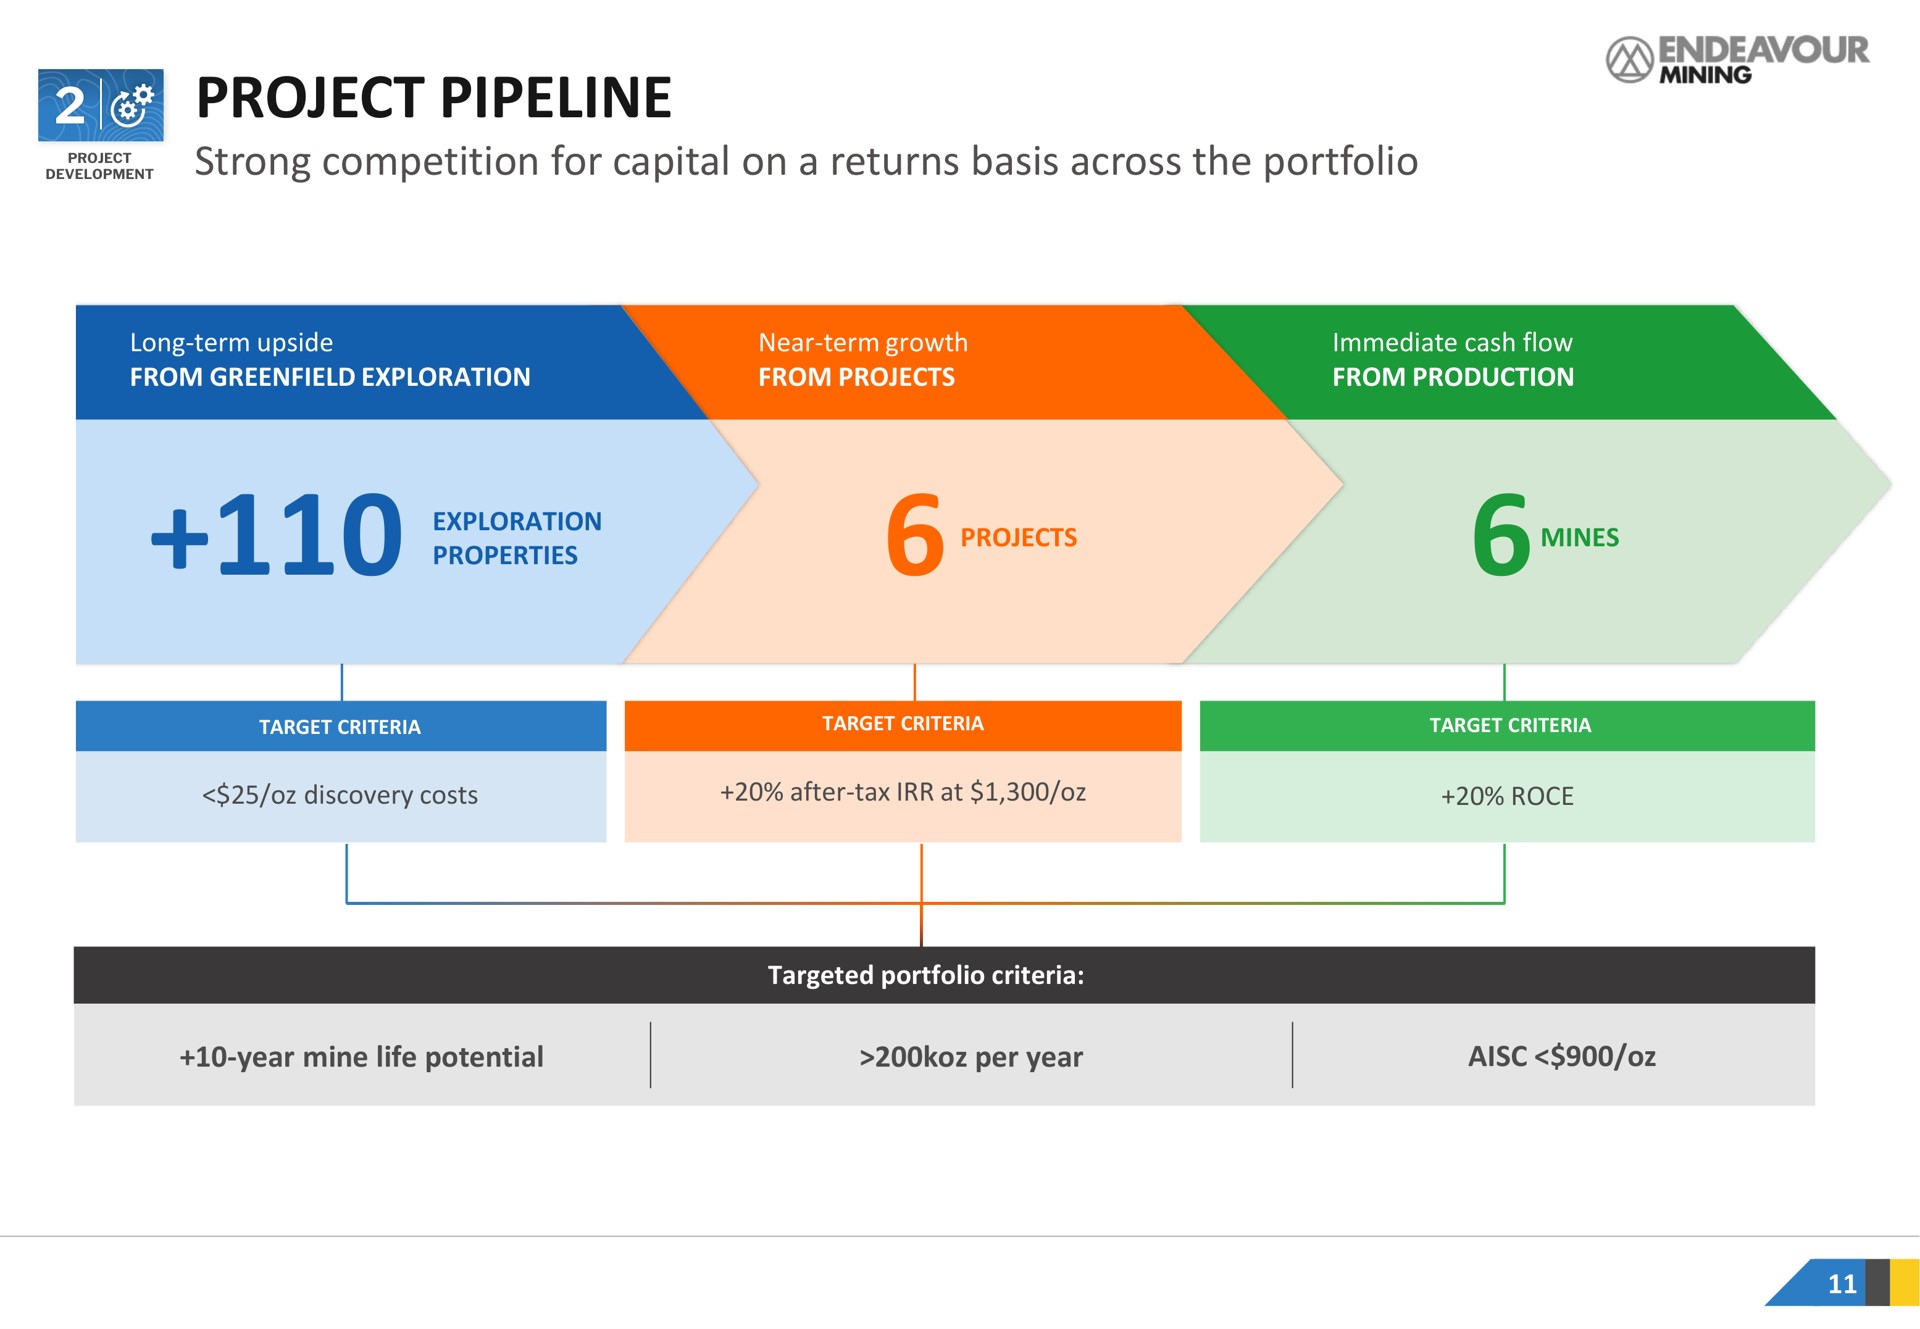 project pipeline strong competition for capital on a returns basis across the portfolio | Endeavour Mining